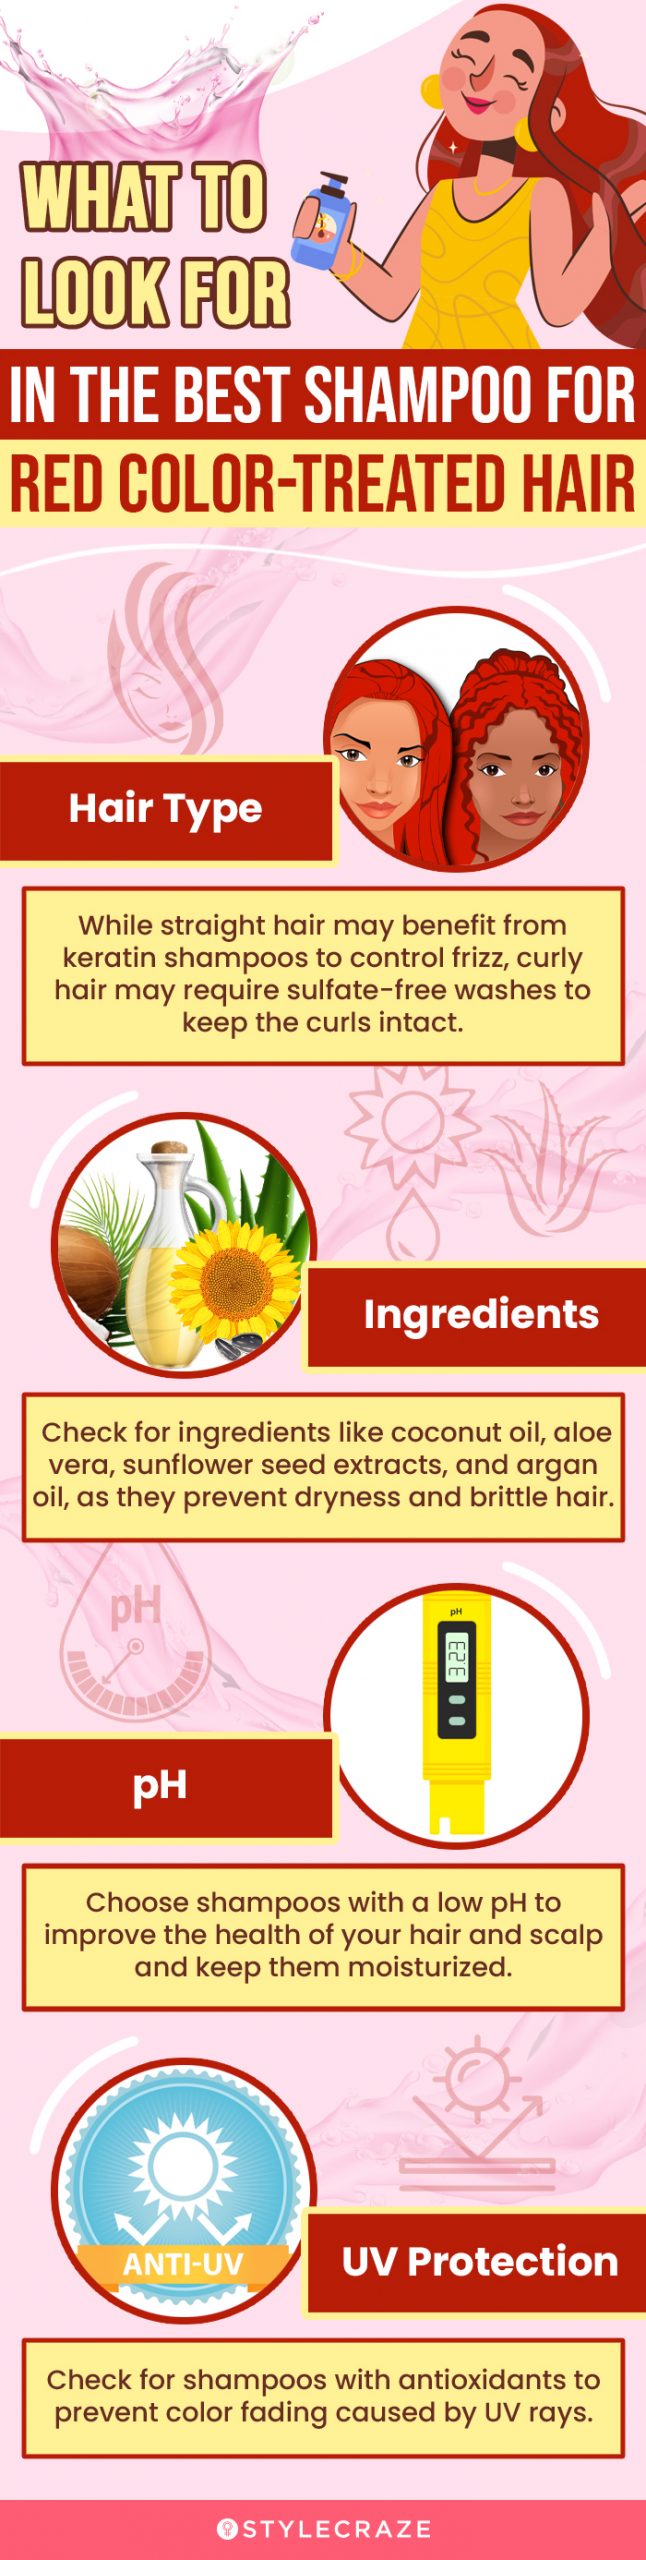 What To Look For In The Best Shampoo For Red Color-Treated H (infographic)